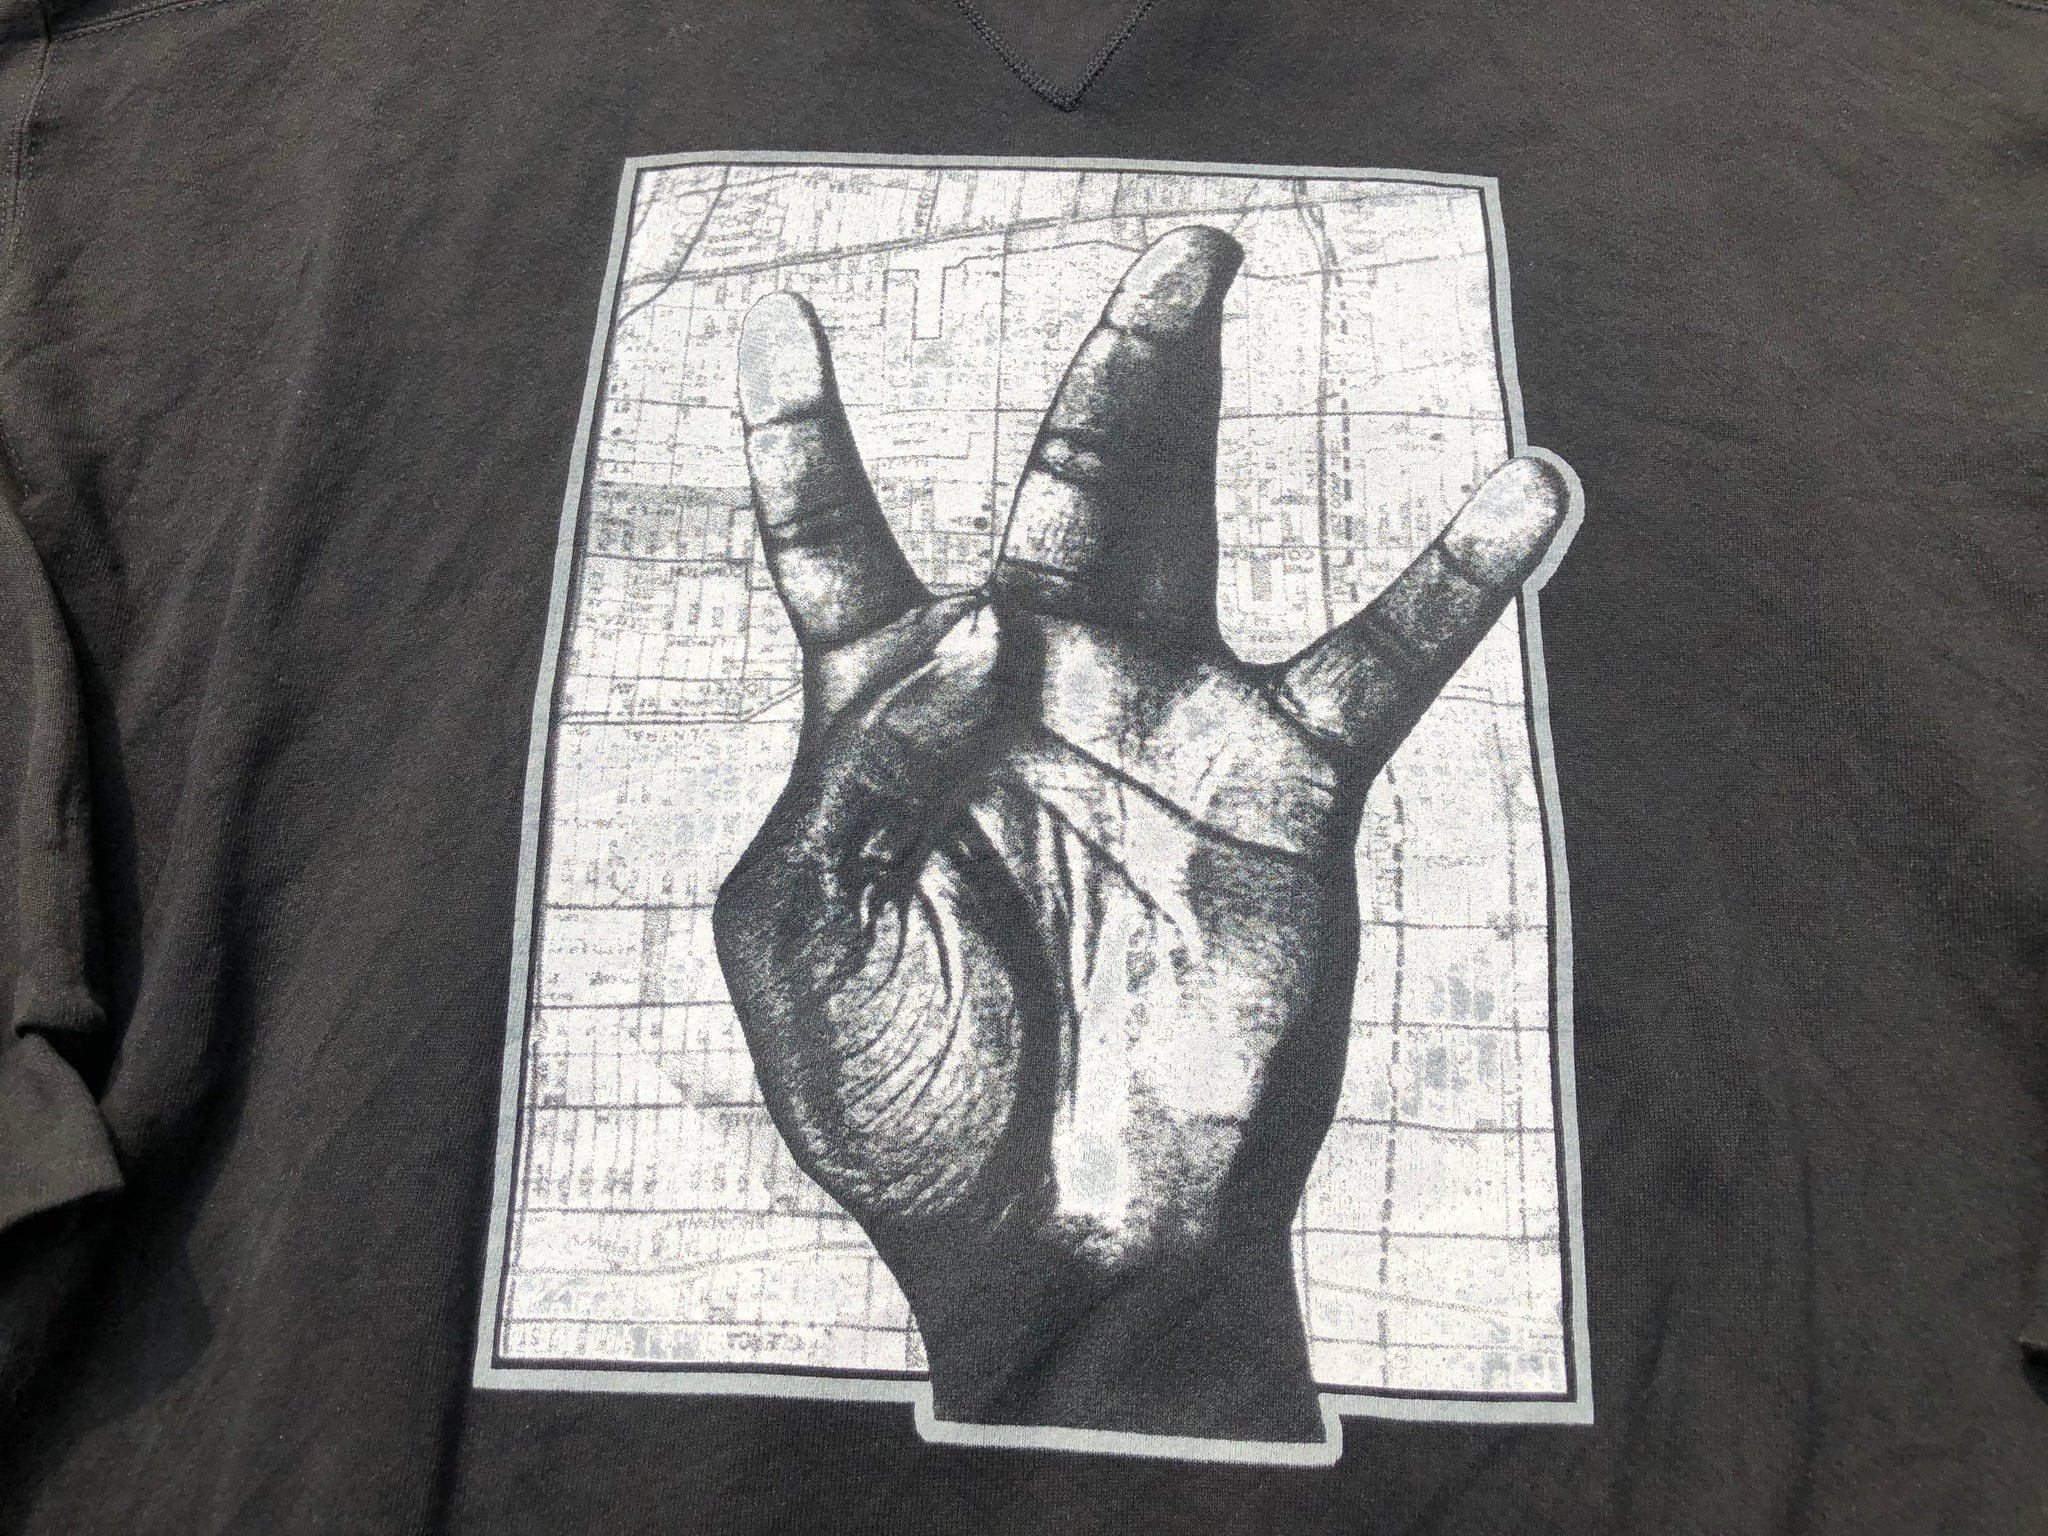 VTG Westside Connection Bow Down To a Killer thats greater than you Sw